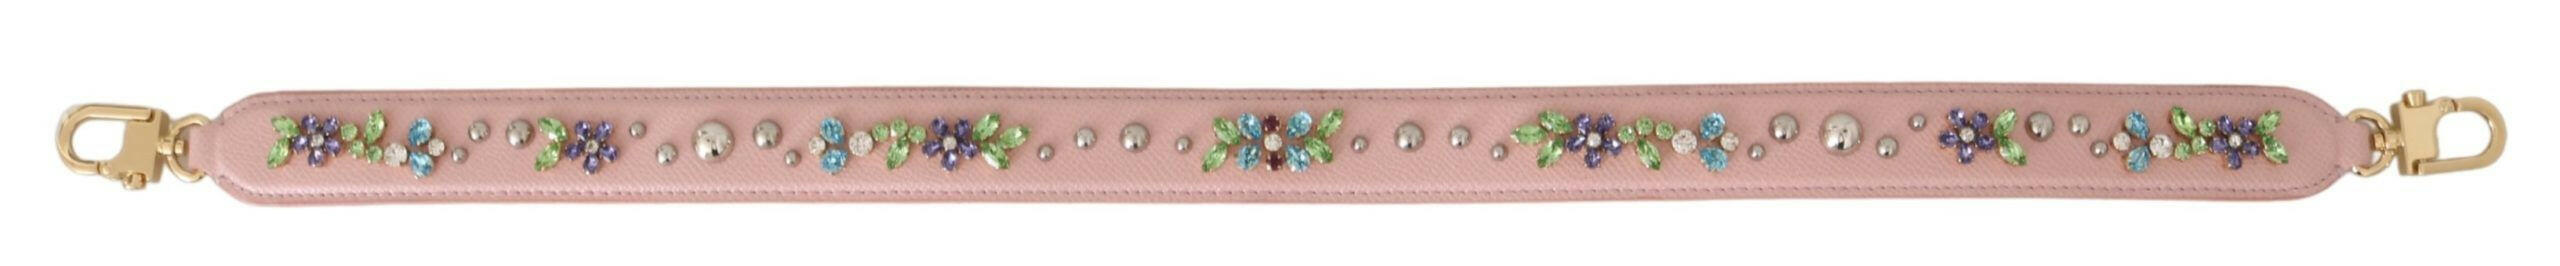 Dolce & Gabbana Pink Leather Crystal Stud Accessory Shoulder Strap - GENUINE AUTHENTIC BRAND LLC  